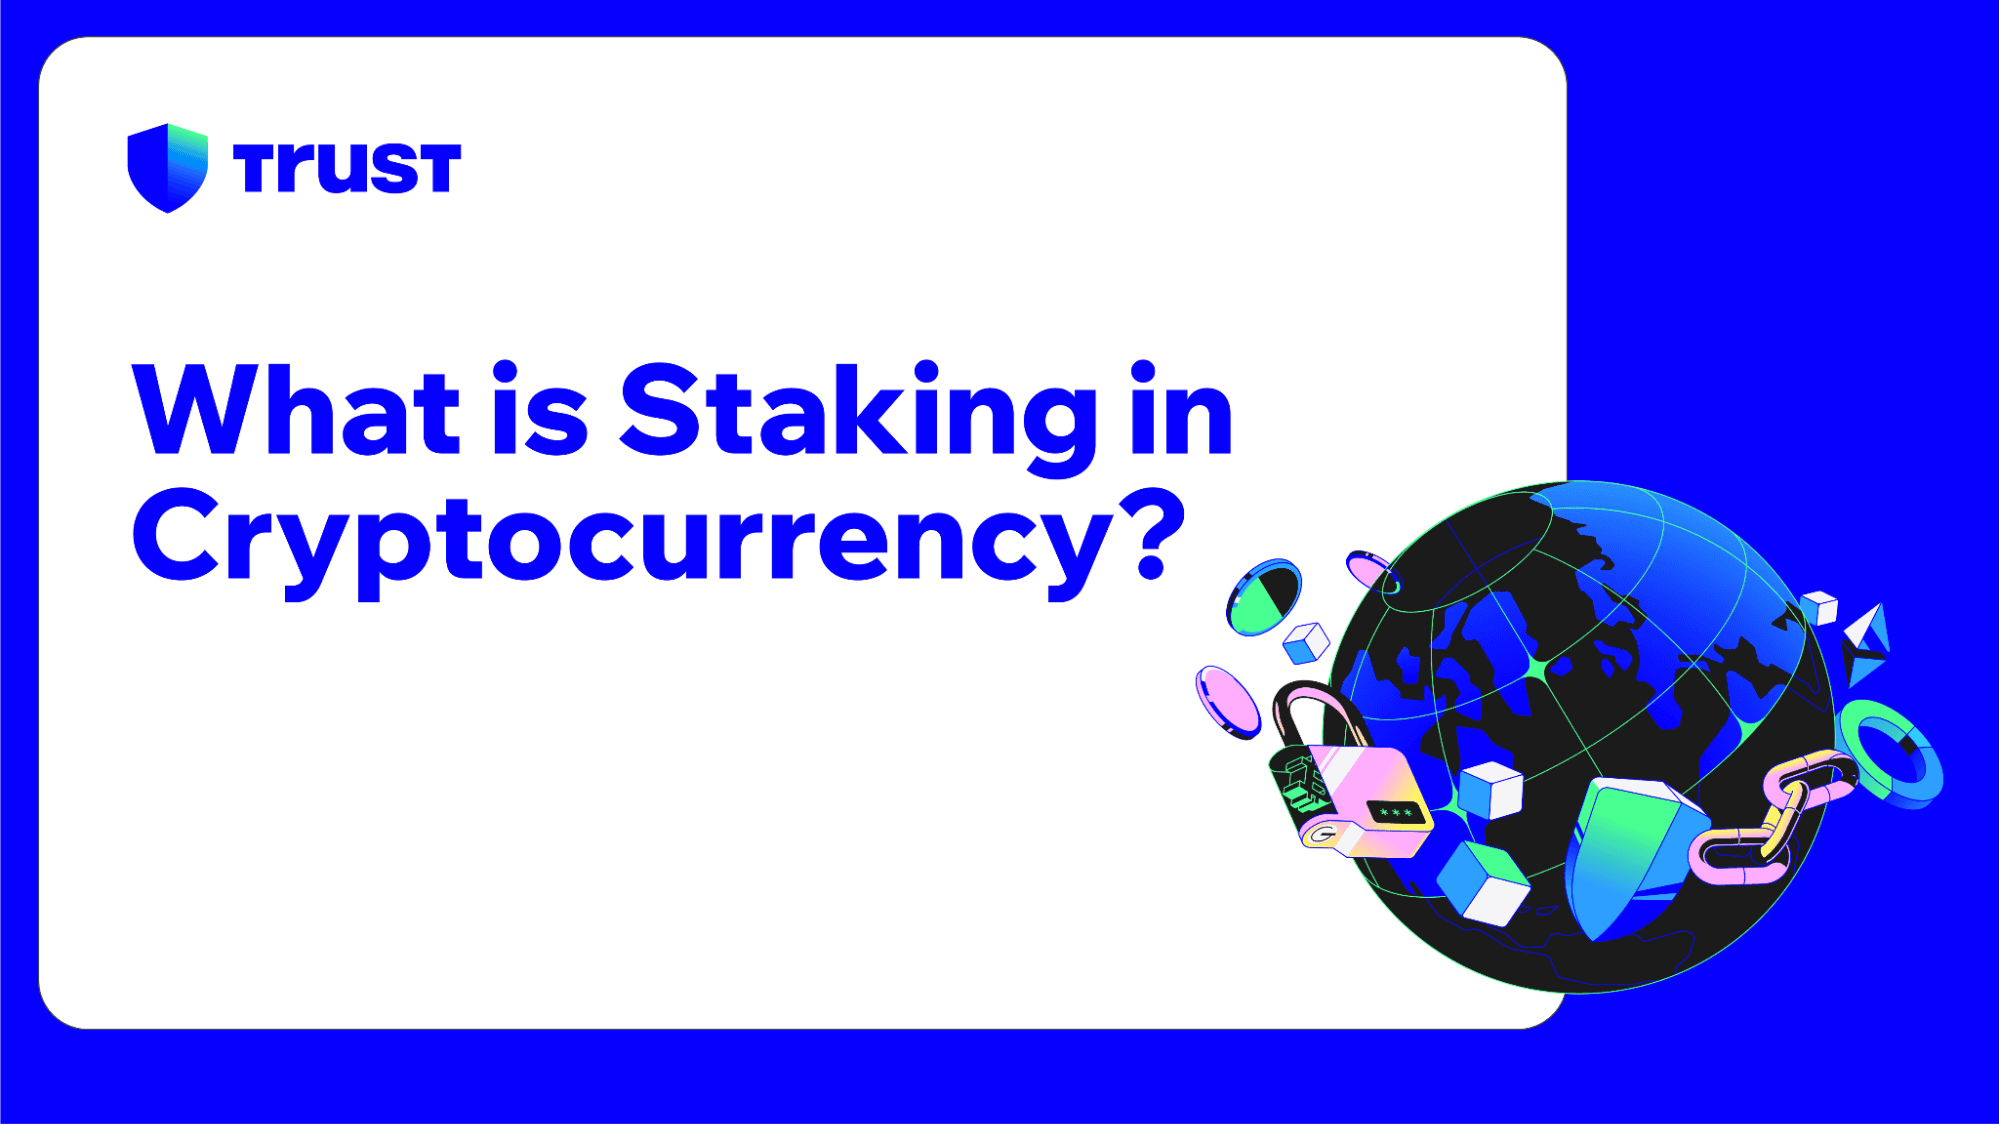 What is Staking in Cryptocurrency?